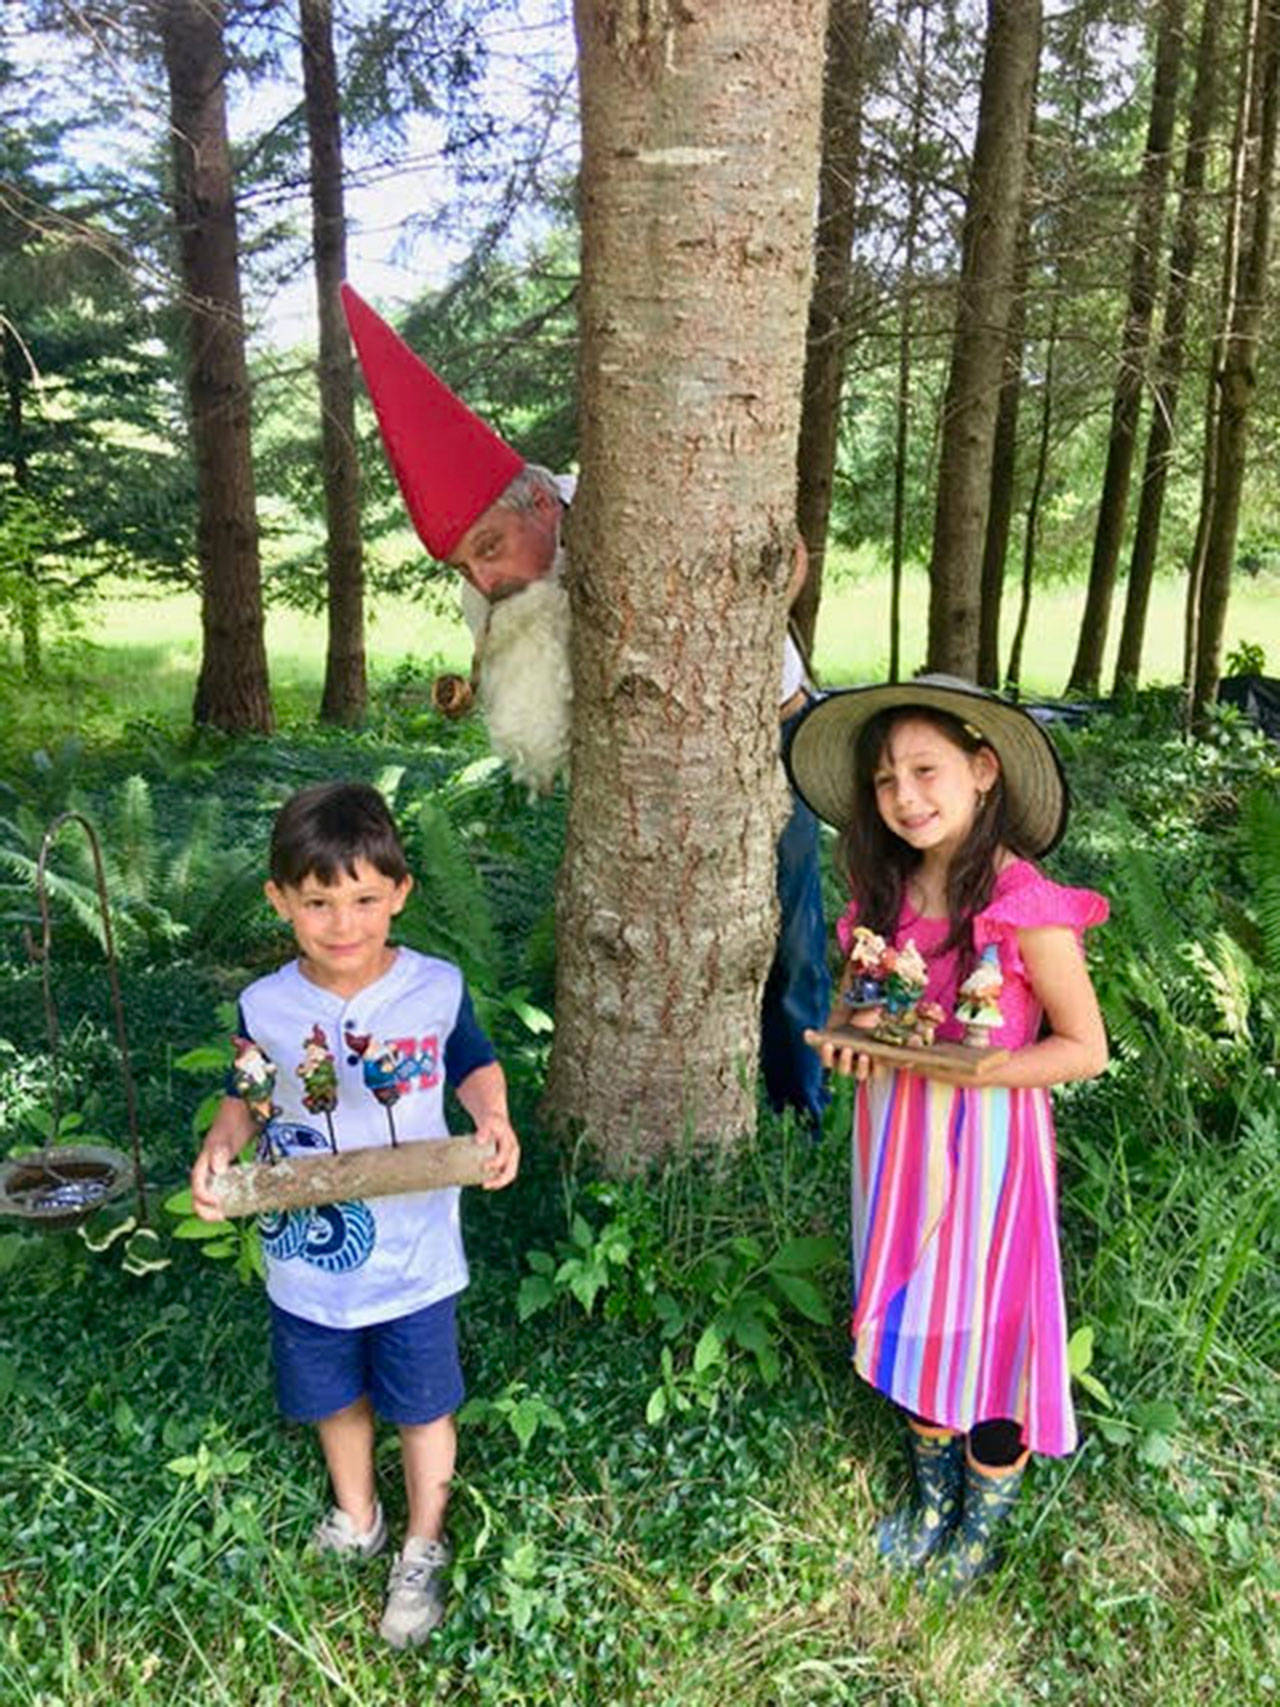 Whimsical Woods’ Grandpa Gnome (Val Jackson), pictured here with his grandchildren, will tell his gnome tales at the June 22 Sequim Farmers Market. Submitted photo